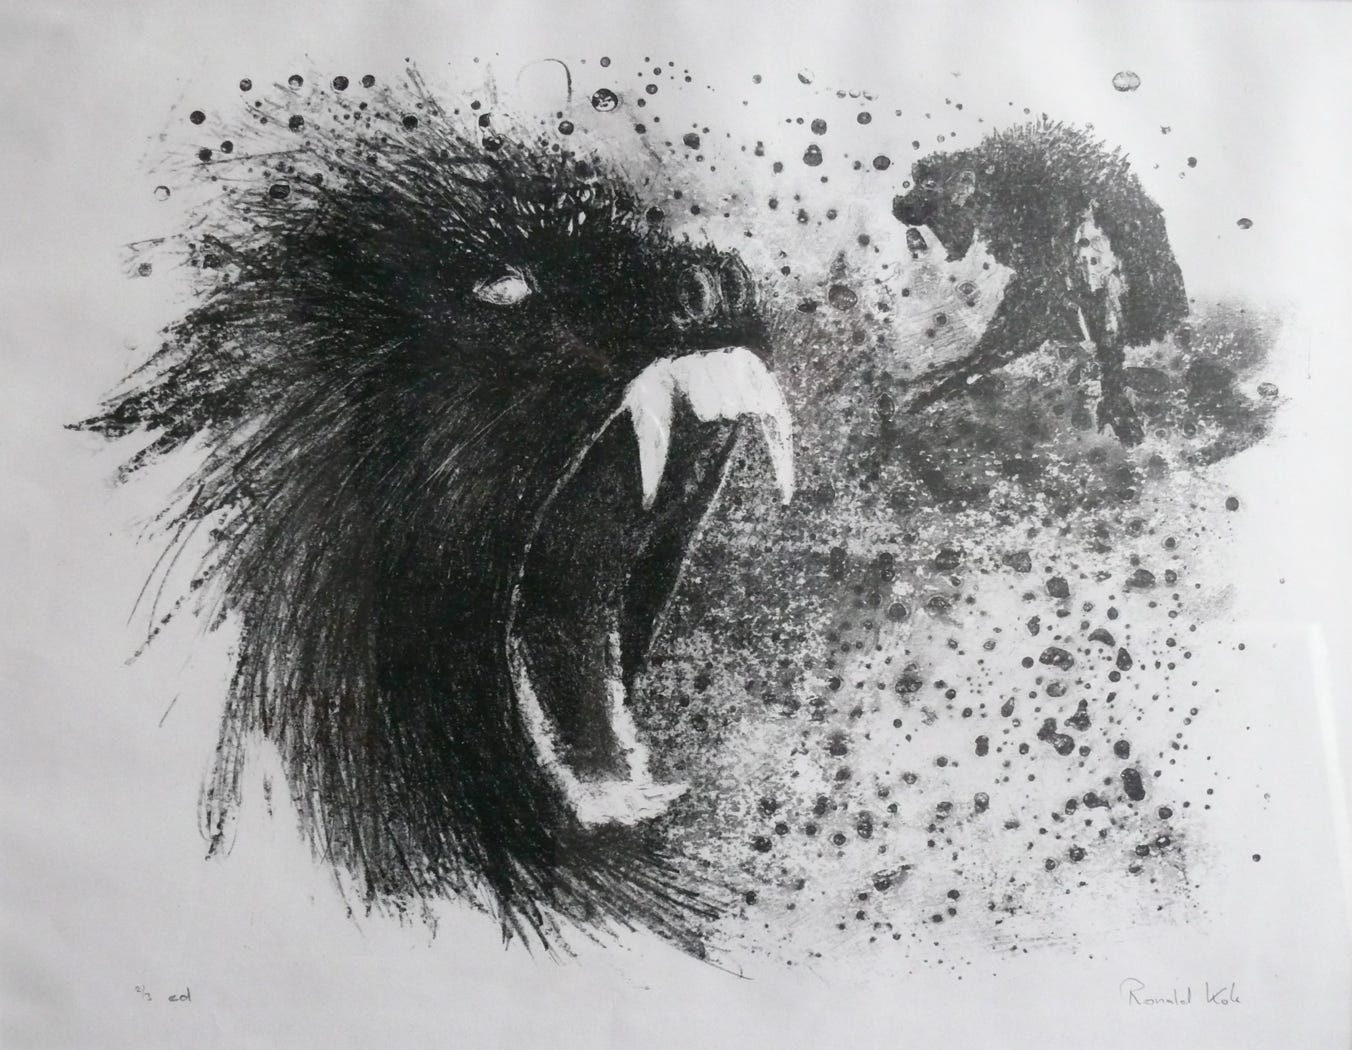 A lithographic image depicting agressive baboons